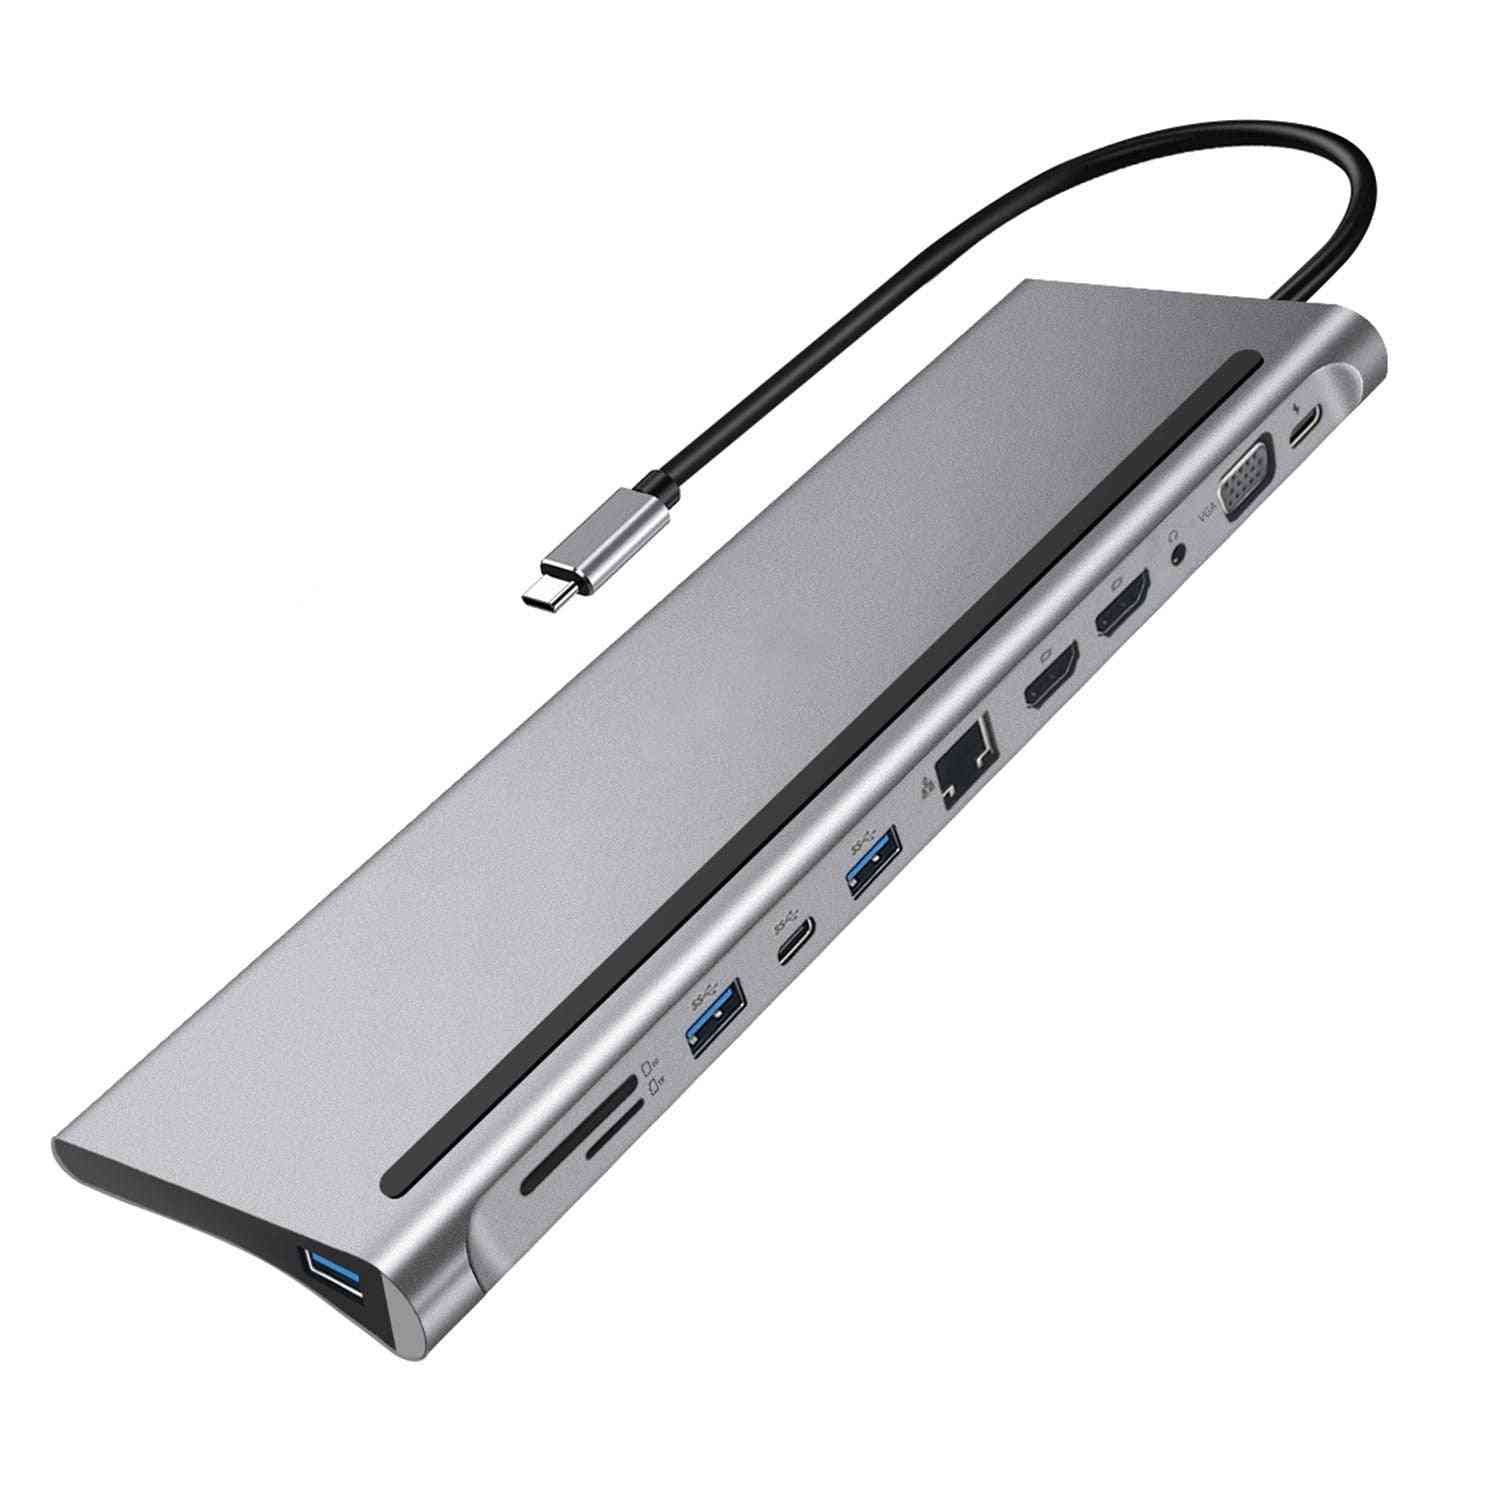 Usb C Hub 12-in-1 Type-c Dongle Adapter /station With Sd/tf Cards Reader For Windows & Macbook